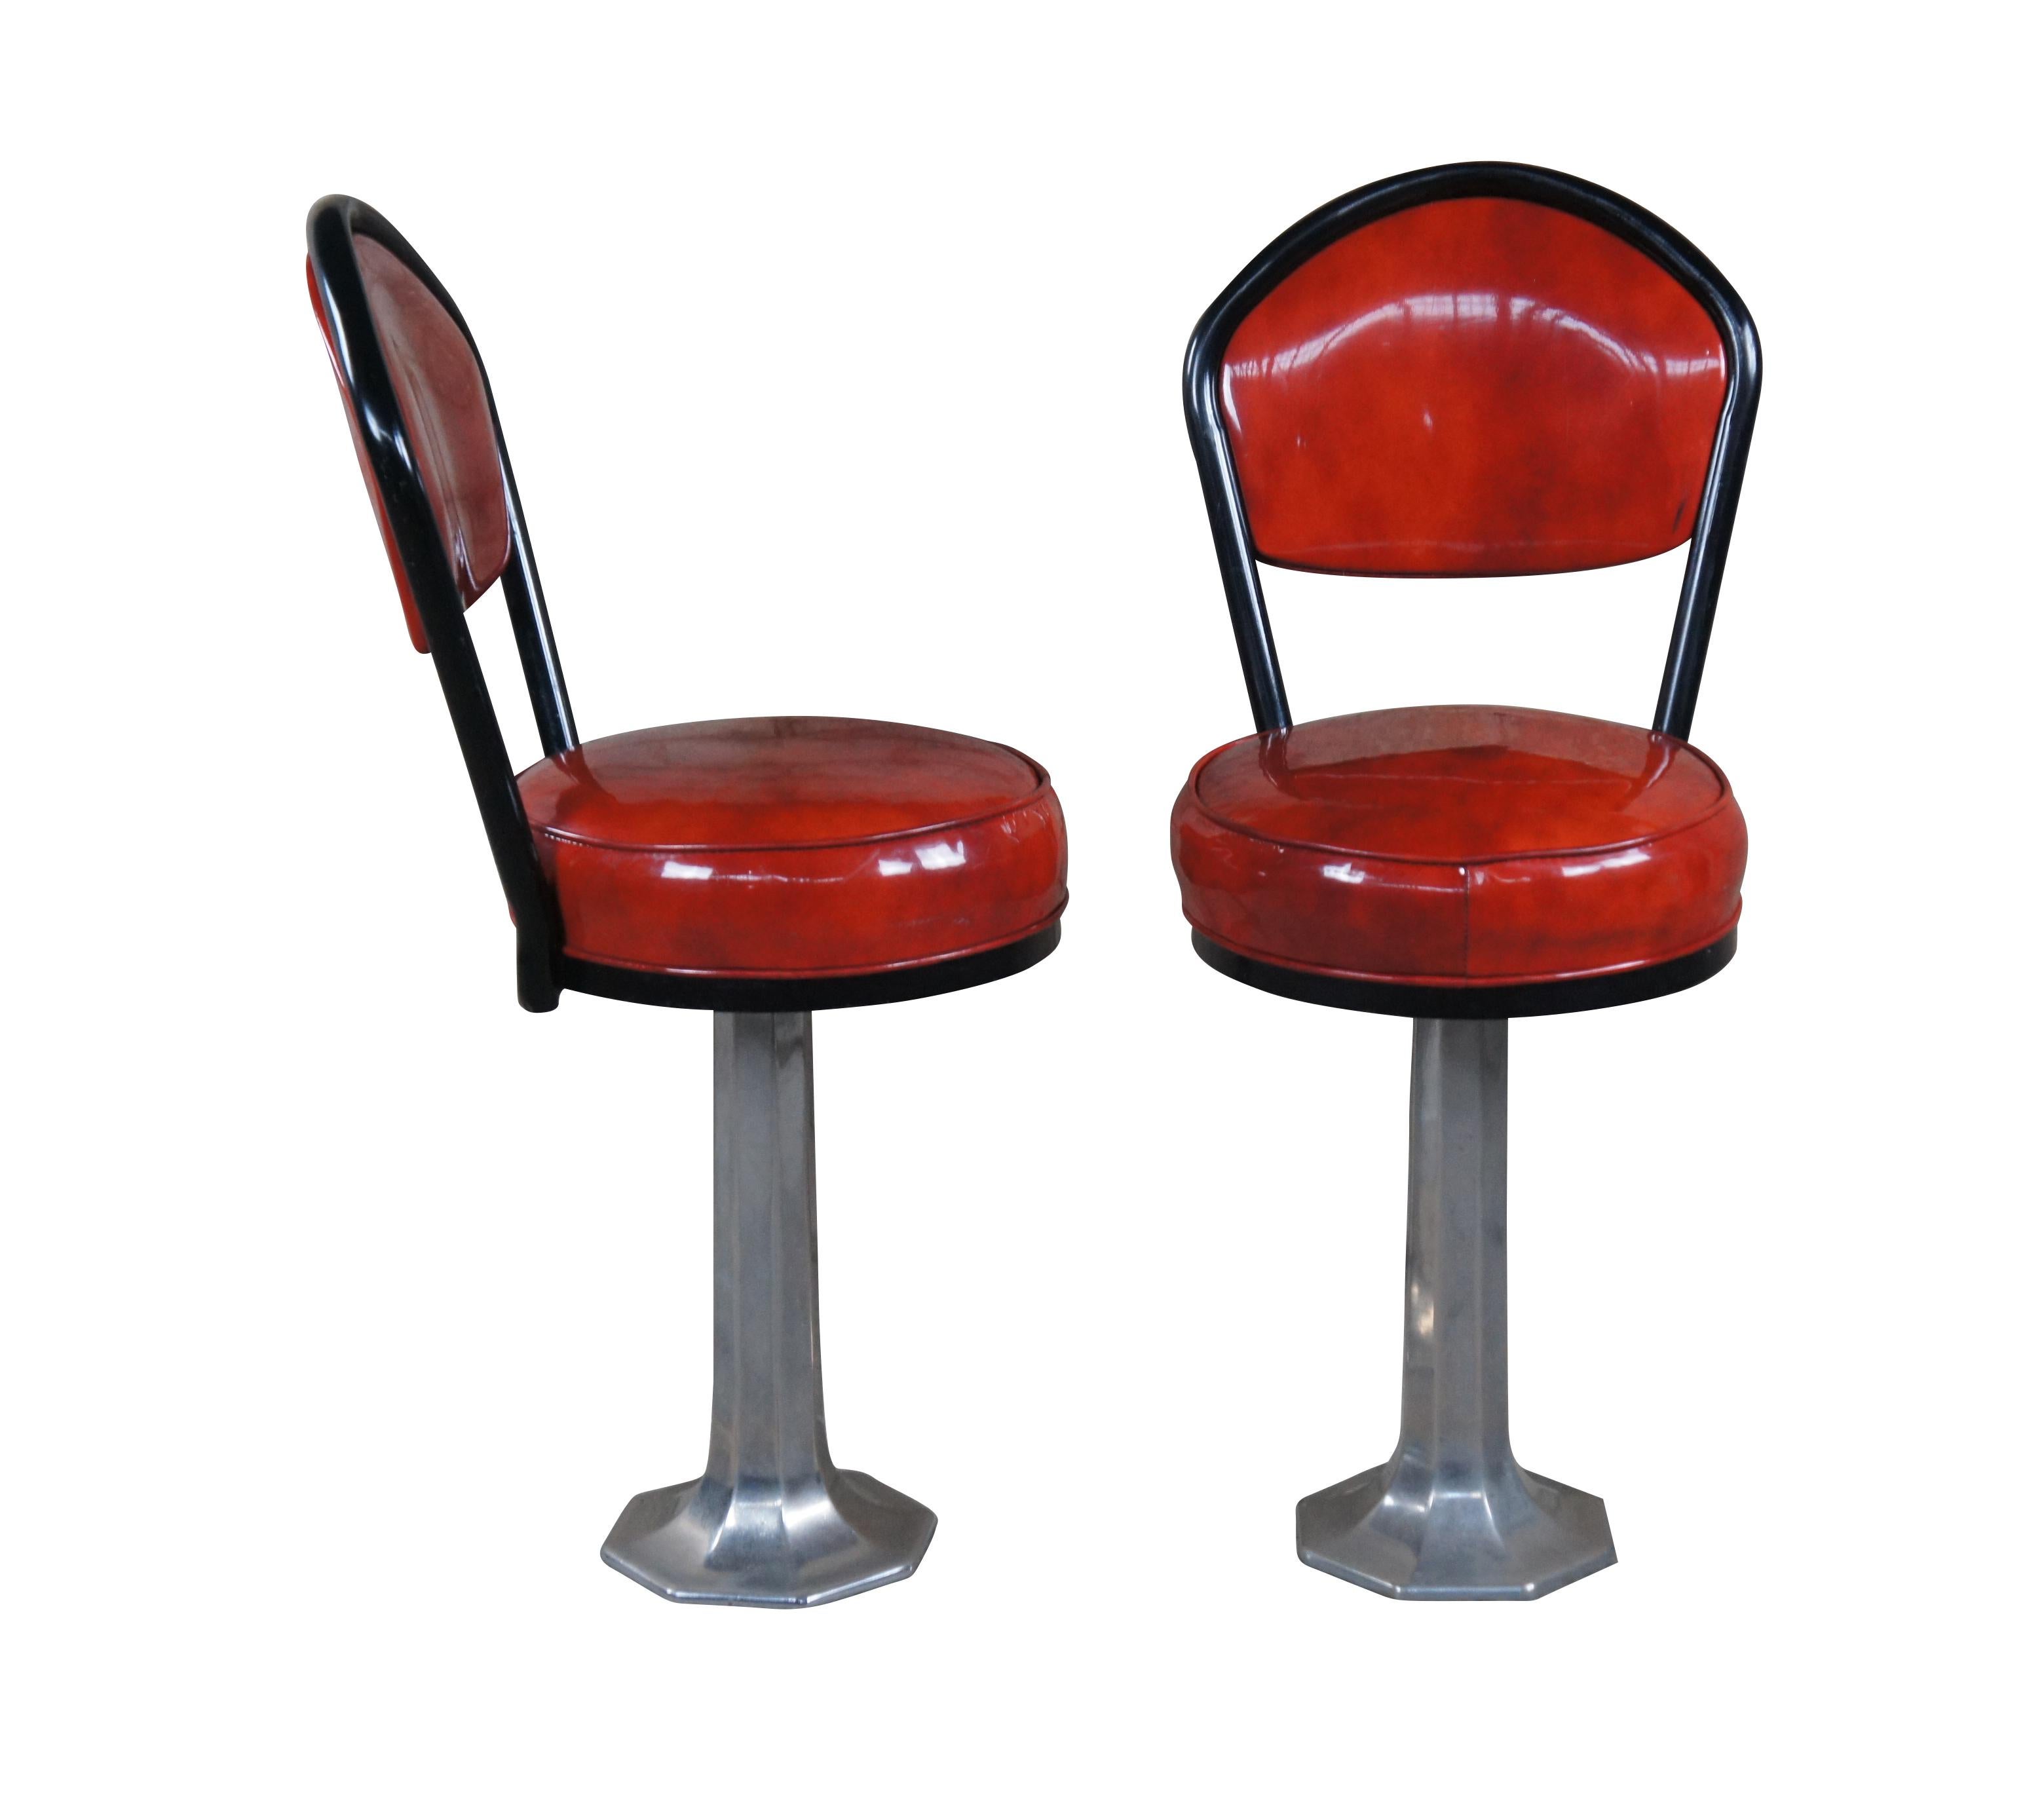 Set of 4 of Late Art Deco Retro Soda / Fountain stools by Chromodern (no. 14).  Made with a baked enamel fiinish over aluminumn base and red seats.  Each stool swivels.

Dimensions:
19